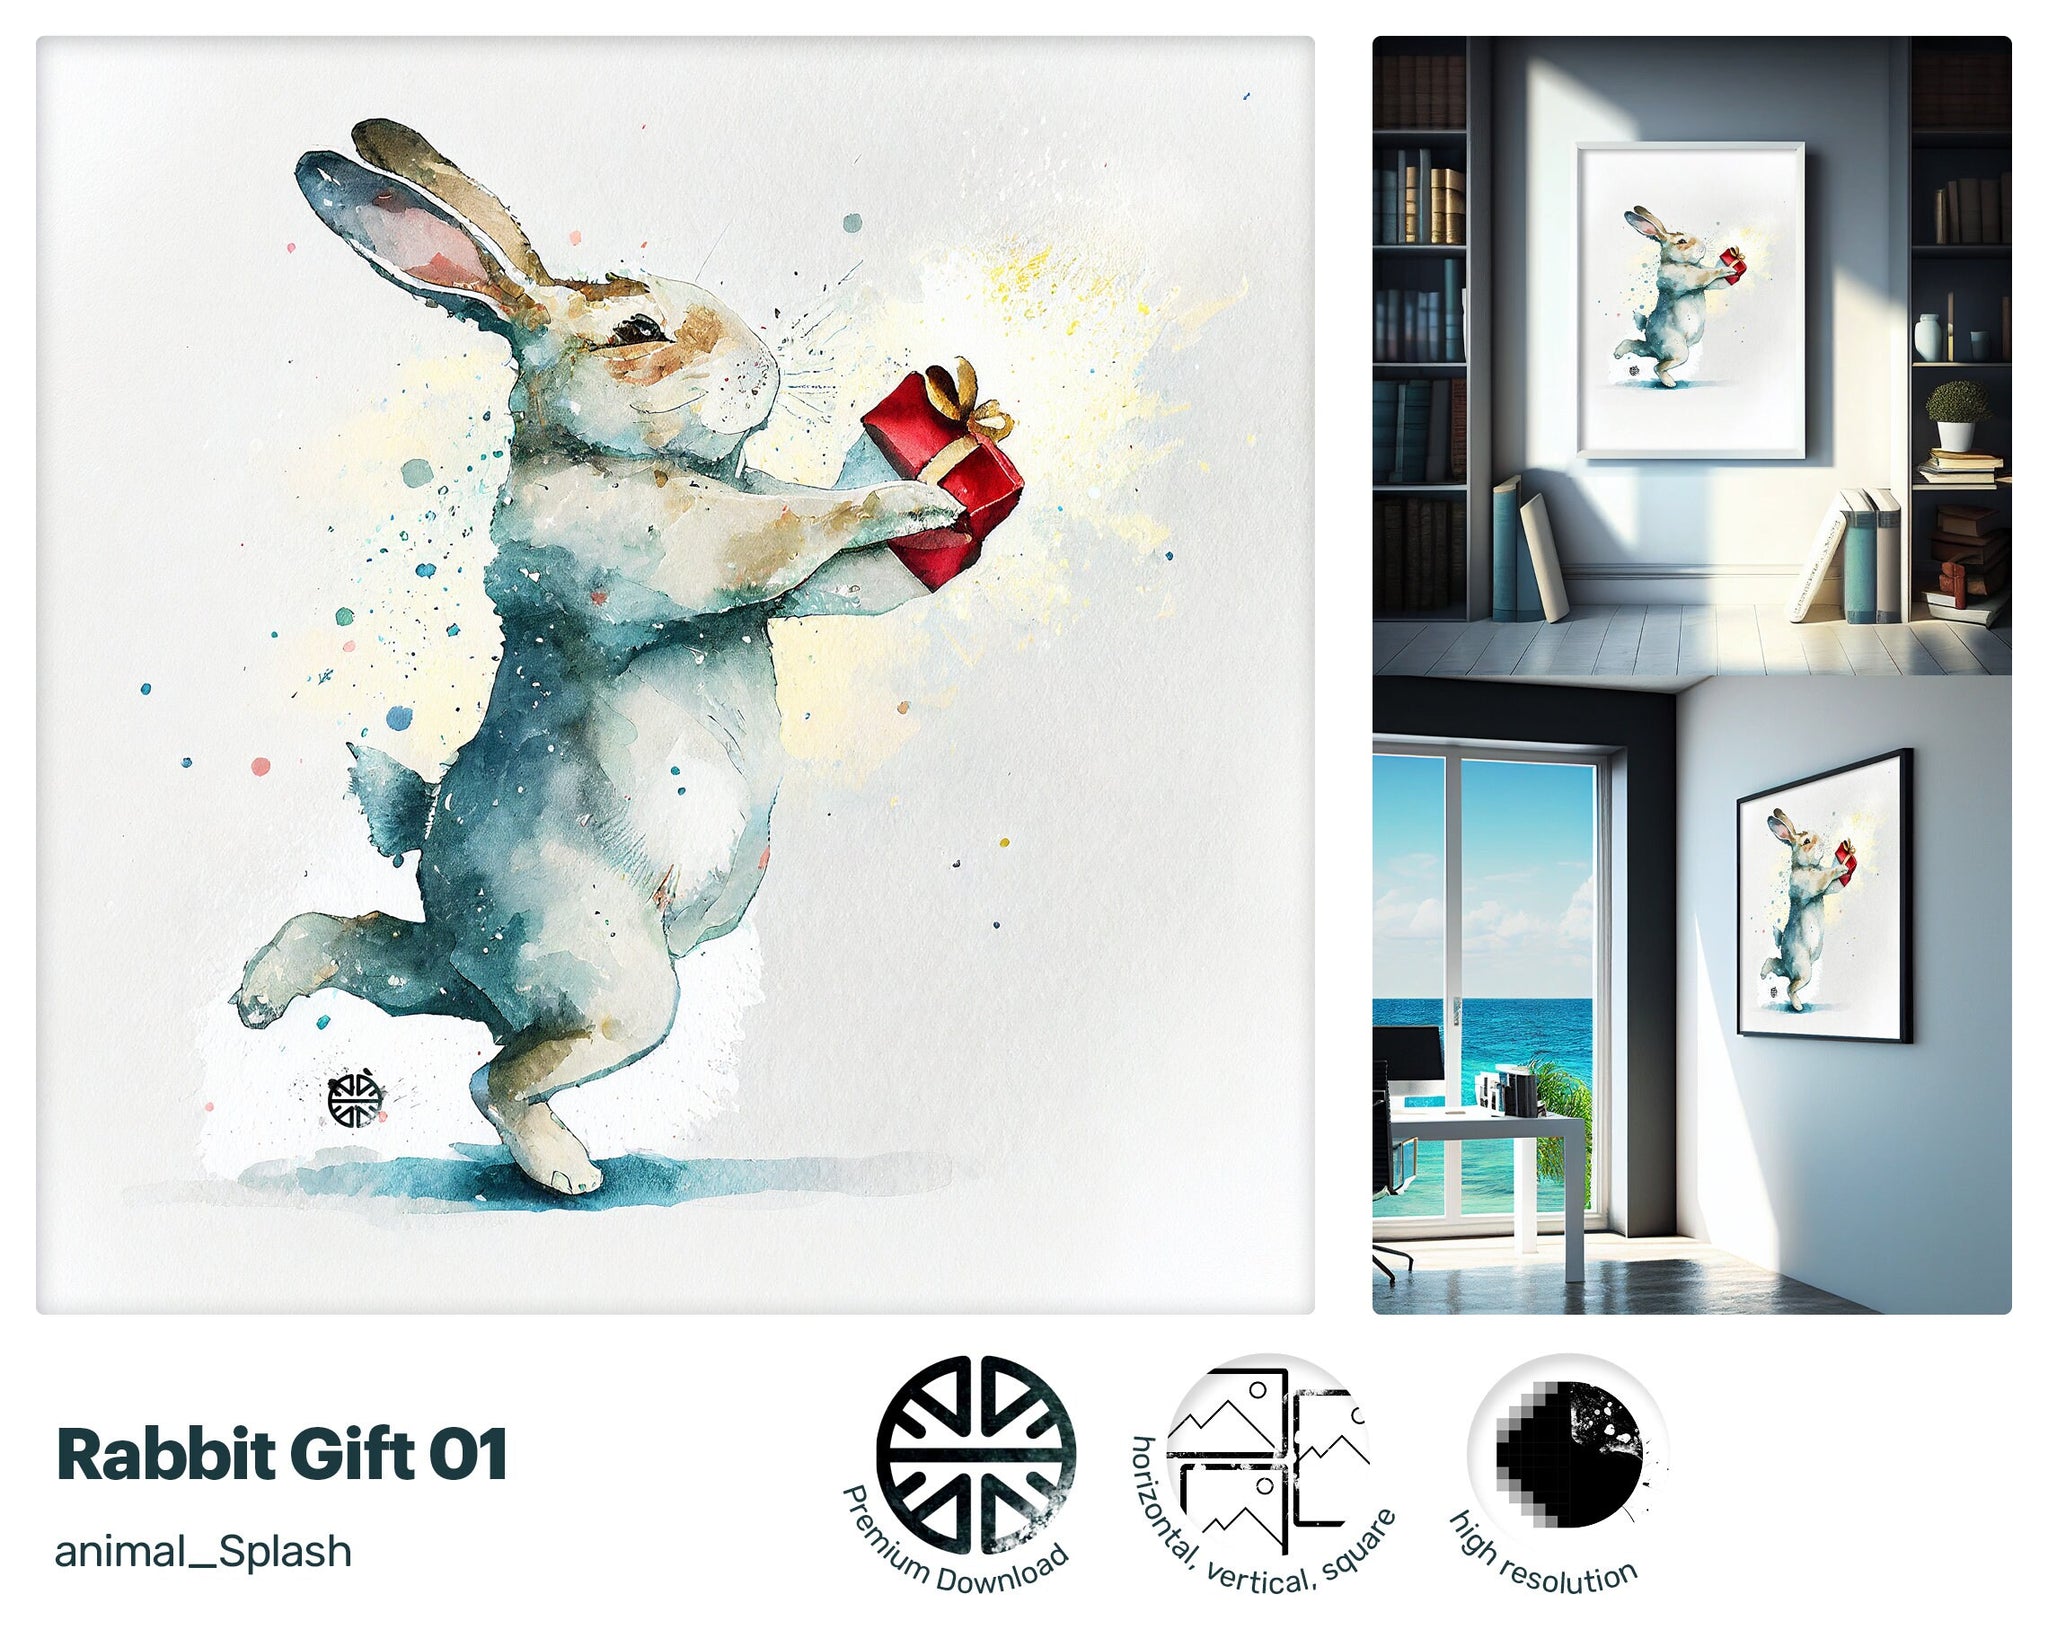 Caring Sparkling Rabbit Gift, Liquid Beautiful Downloadable, Jazzy Radiant Happy Yummy Intriguing Download